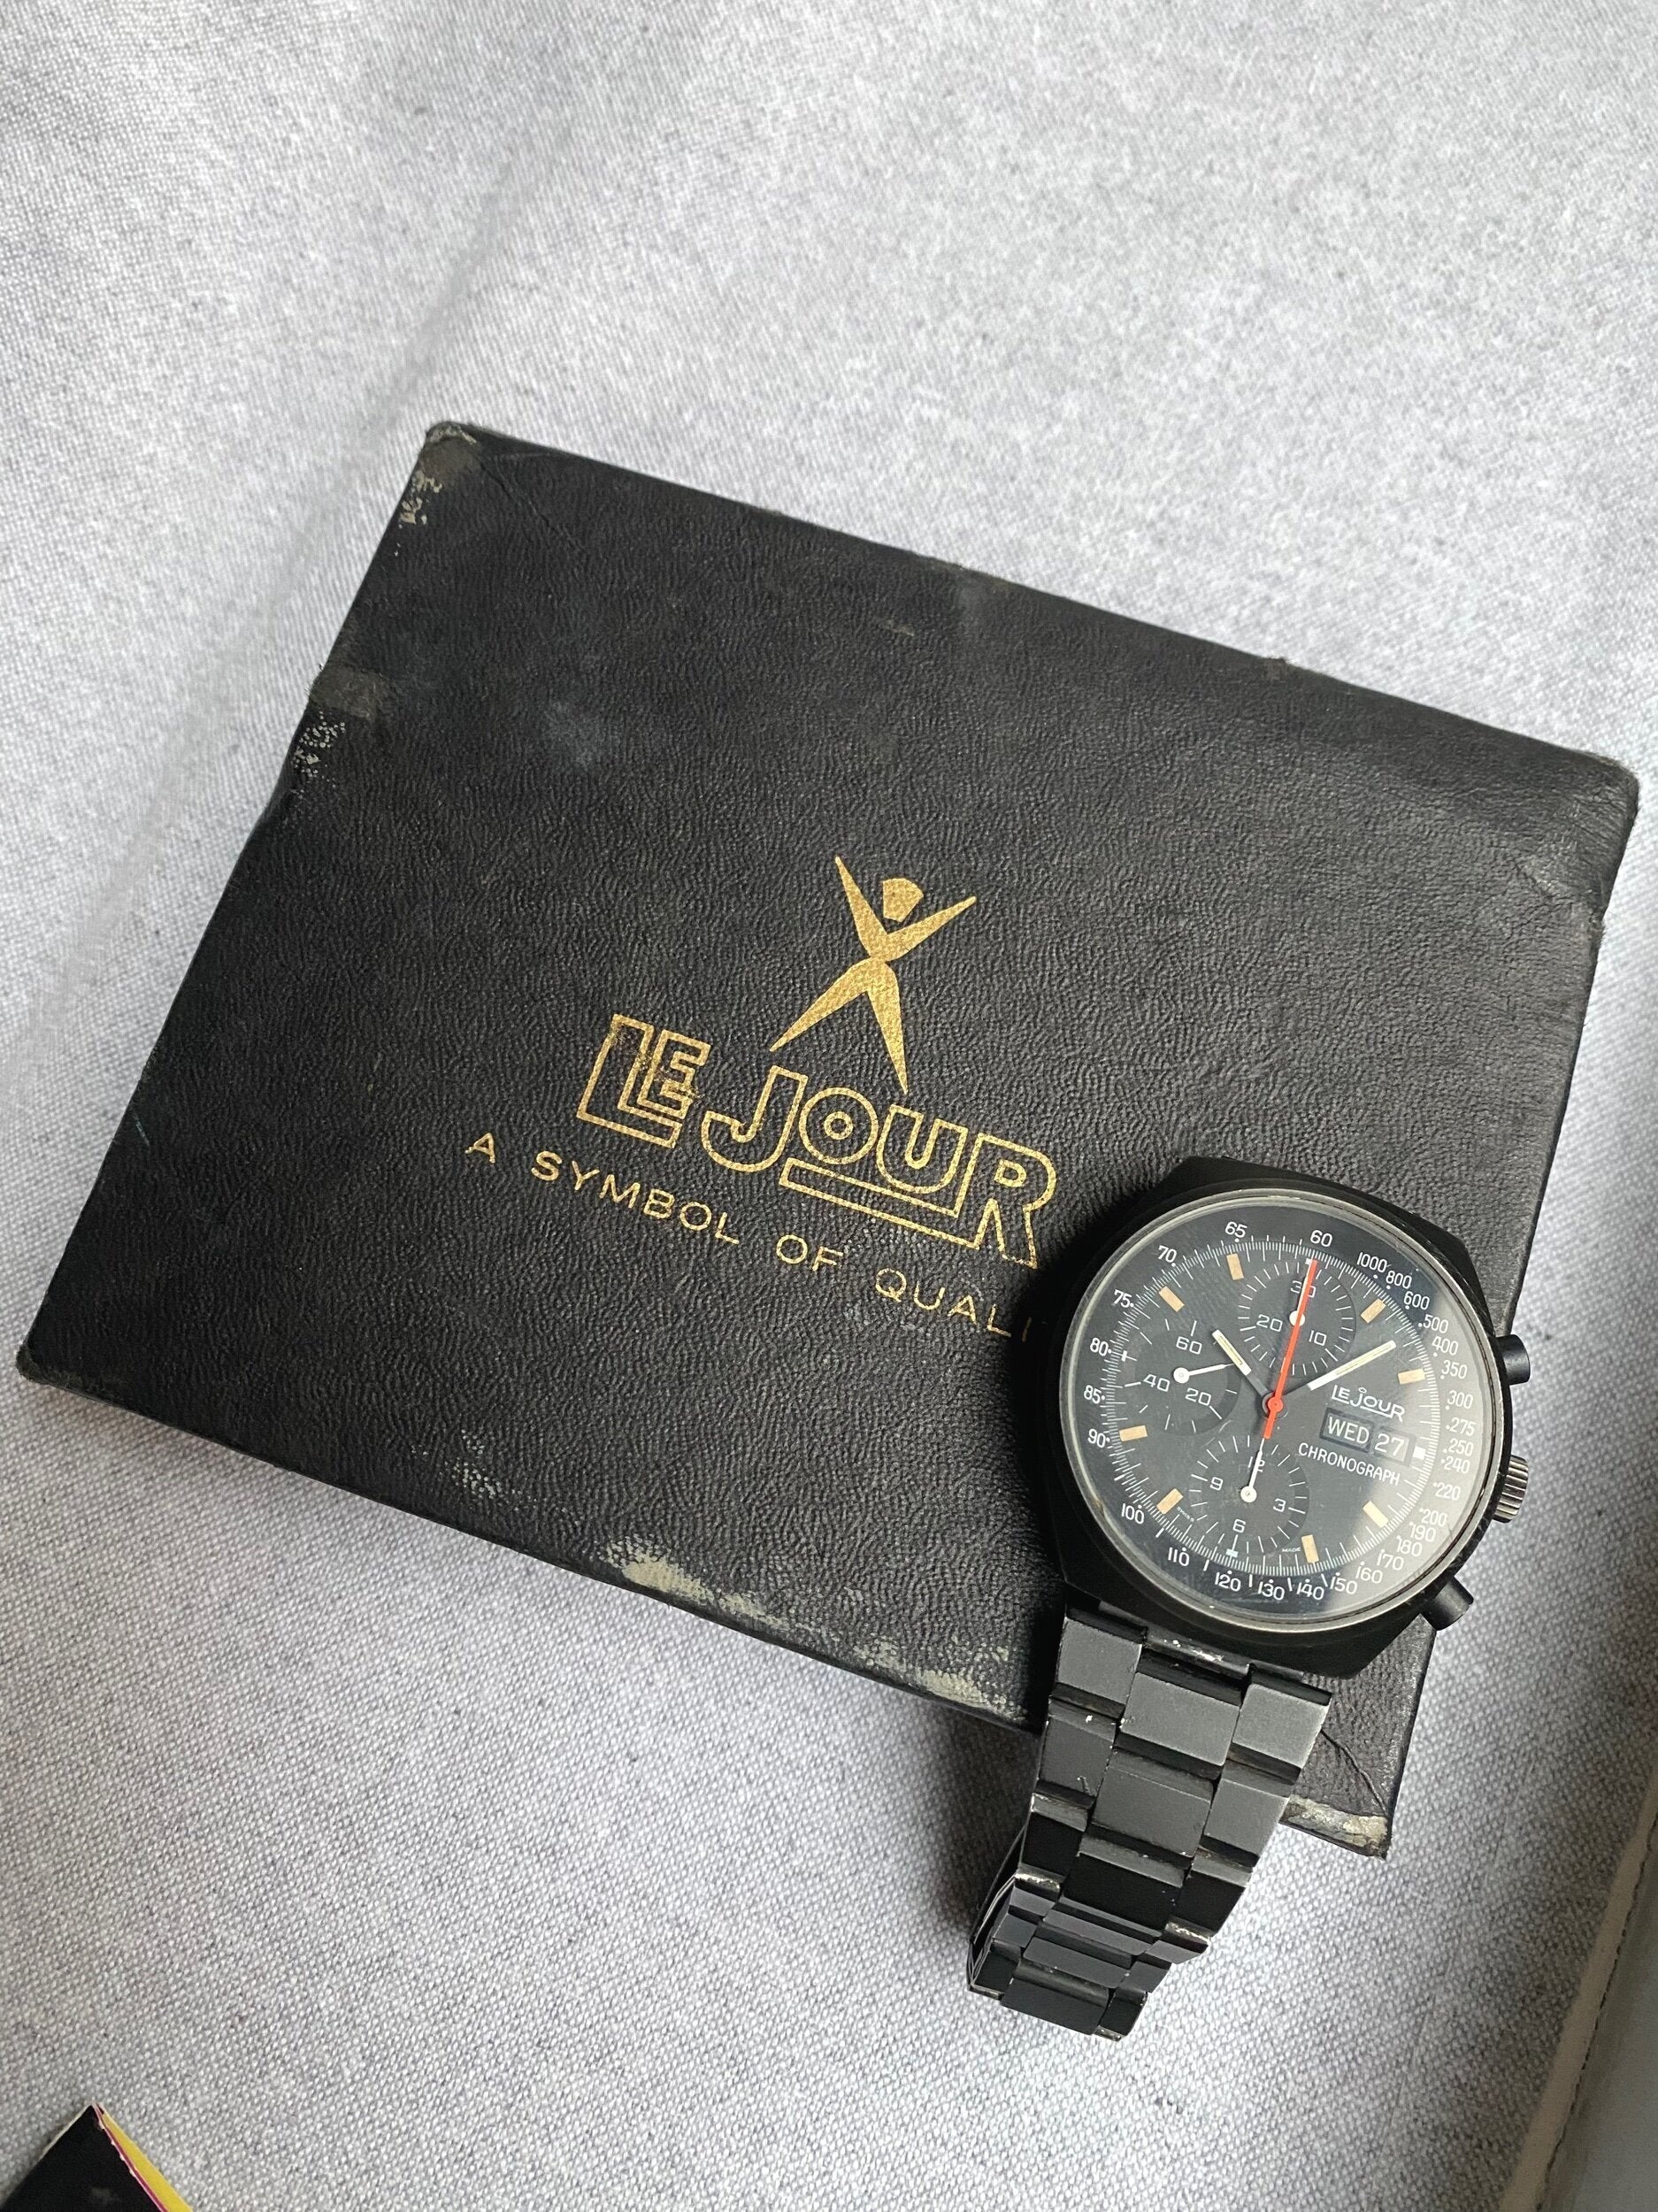 1970s LeJour PVD Chronograph ref. 7000 (Box & Papers)